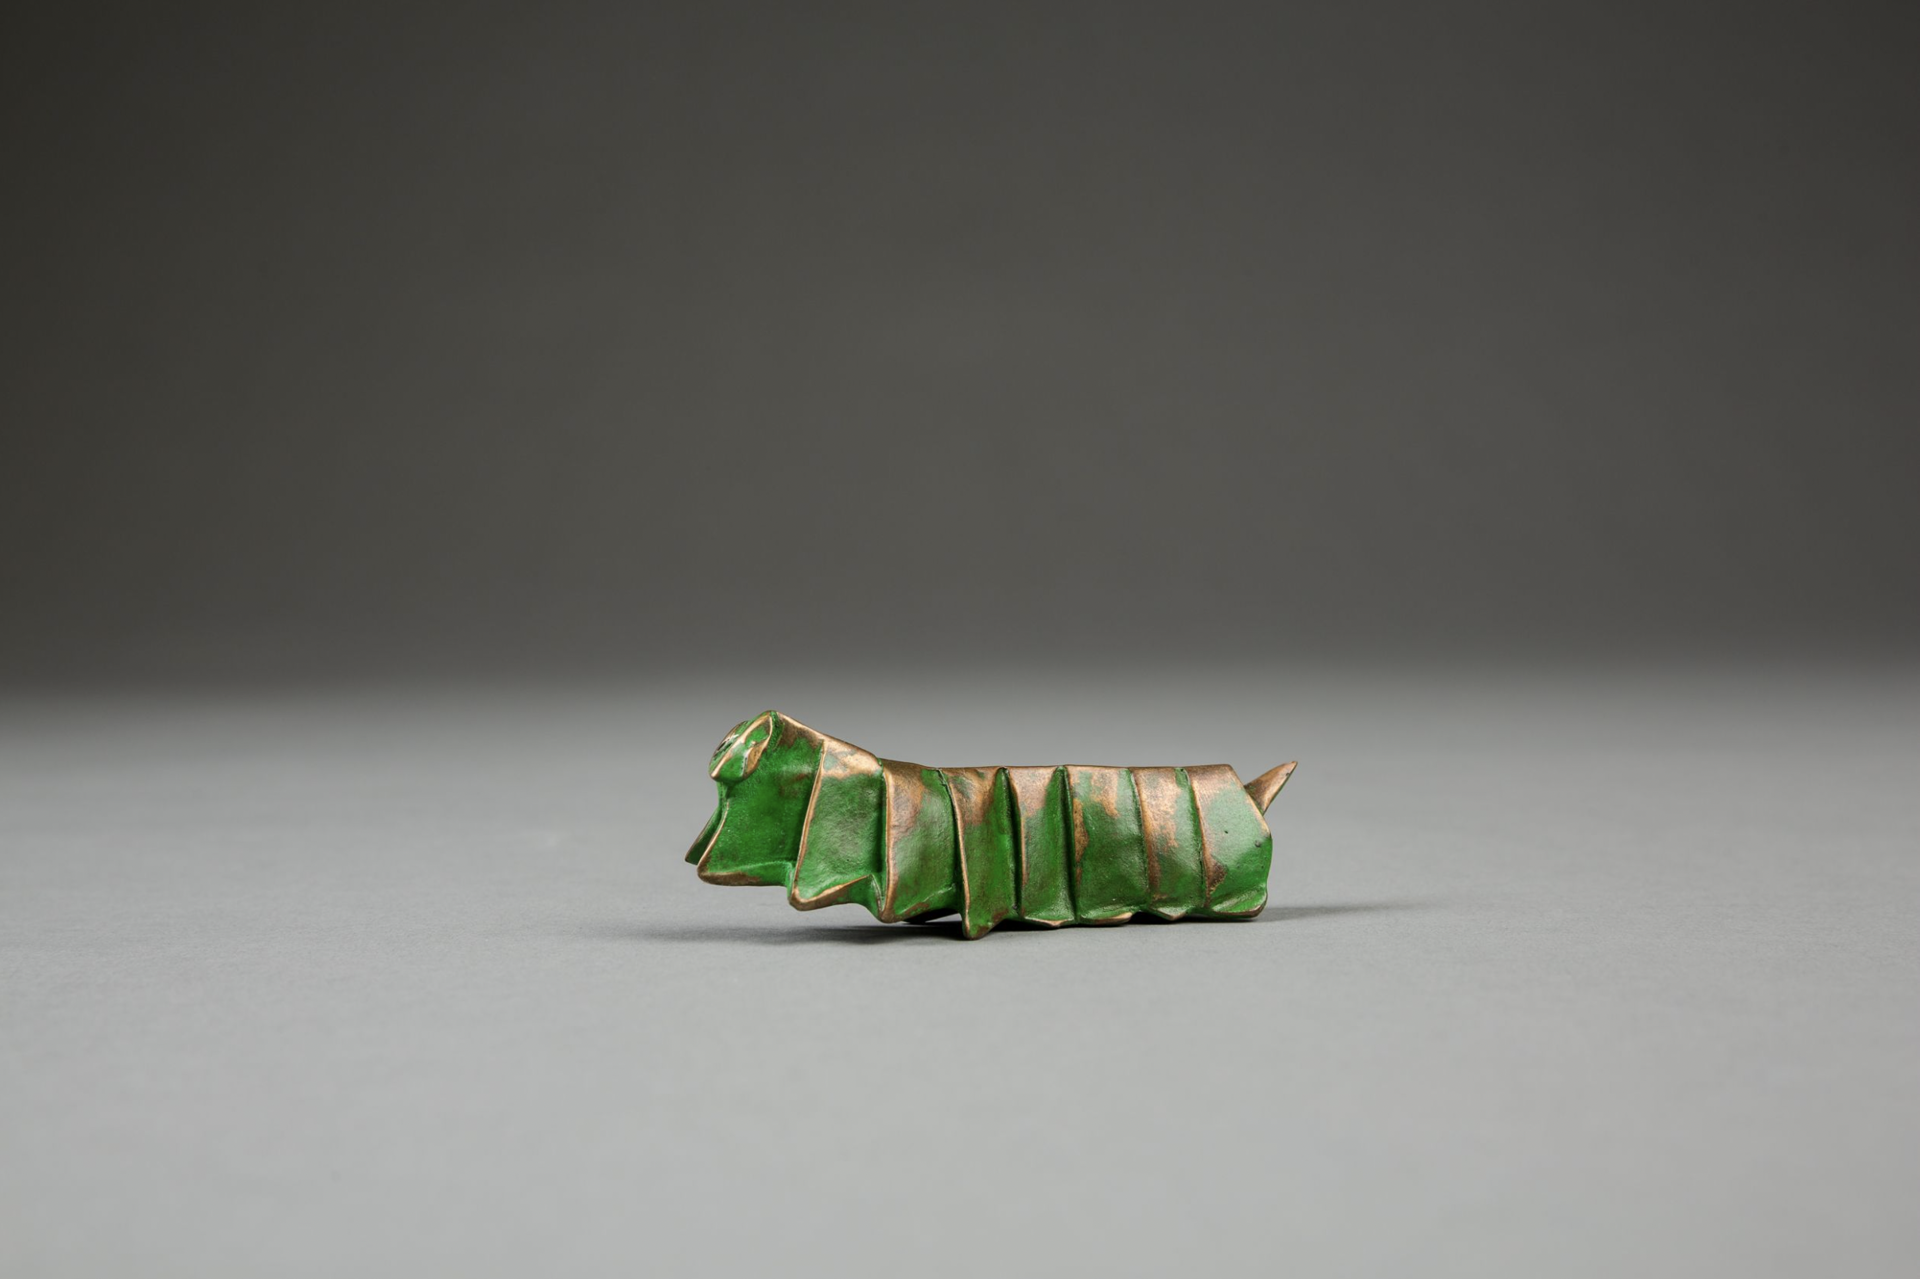 Consider the Caterpillar (Collaboration with Michael G. LaFosse) by KEVIN BOX